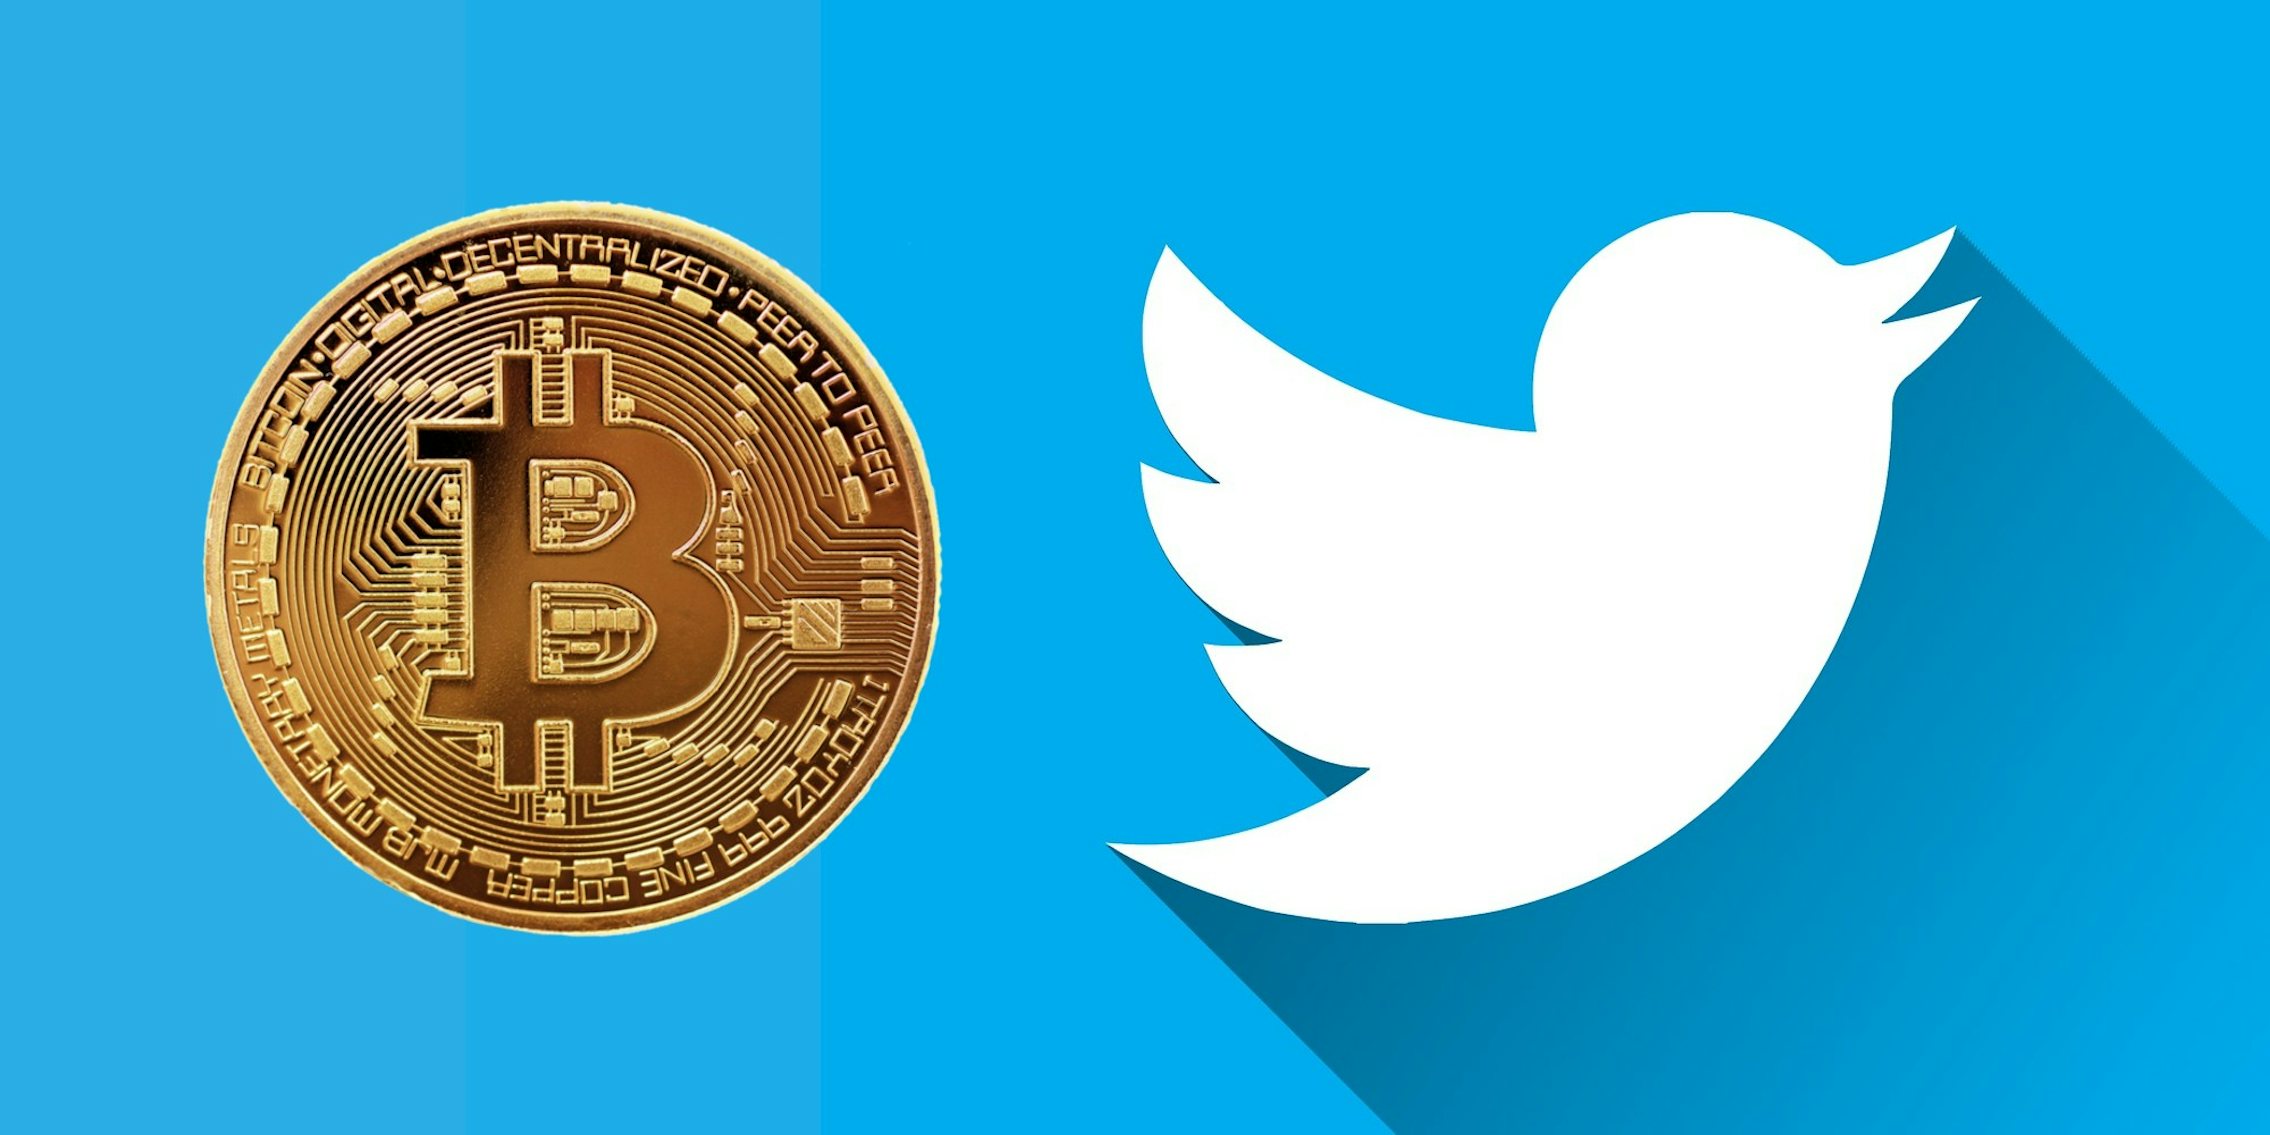 A bitcoin next to the Twitter logo